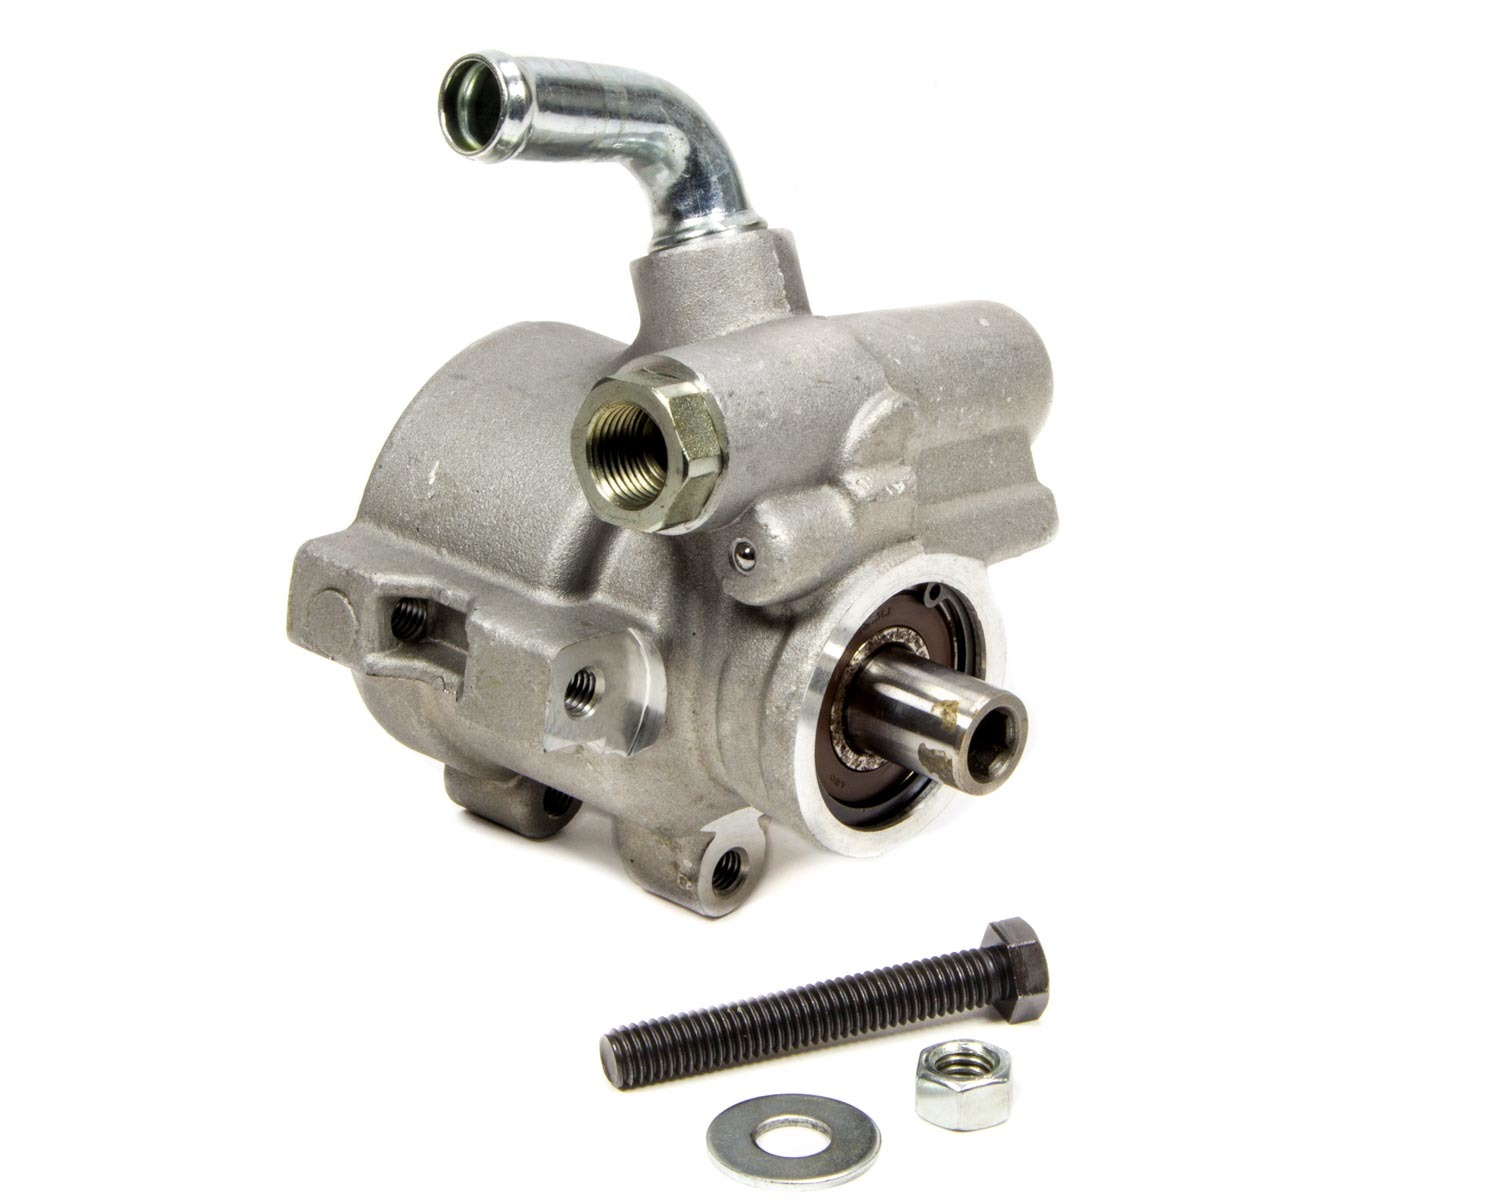 March Performance P315 Power Steering Pump, GM Type 2, 3 gpm, 1200 psi, Aluminum, Natural, Universal, Each